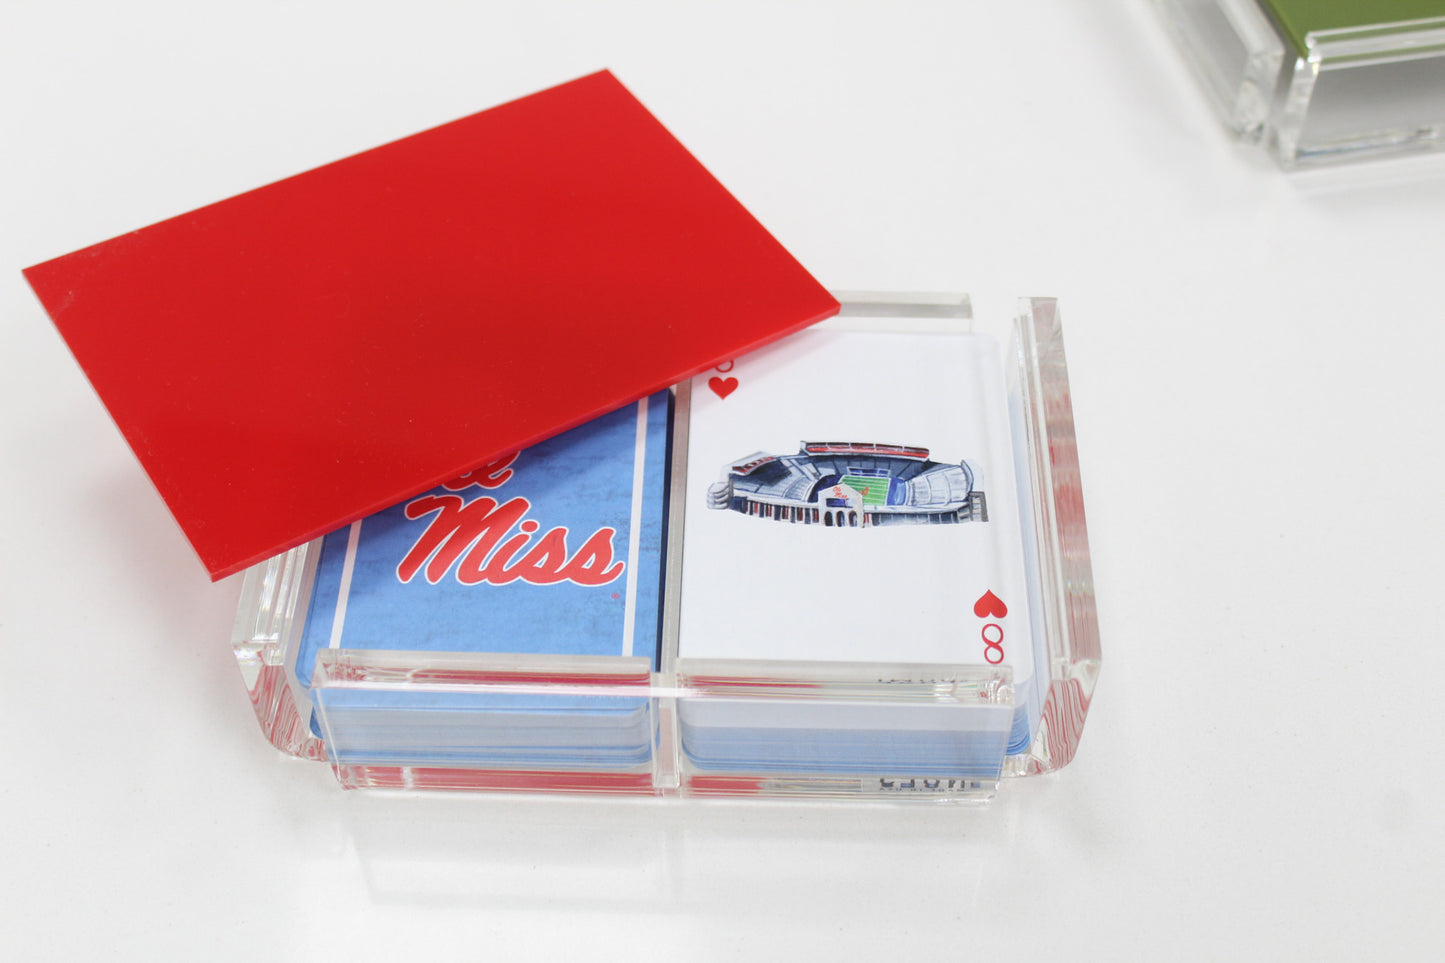 red acrylic playing card case from FOSTER with Ole Miss playing cards